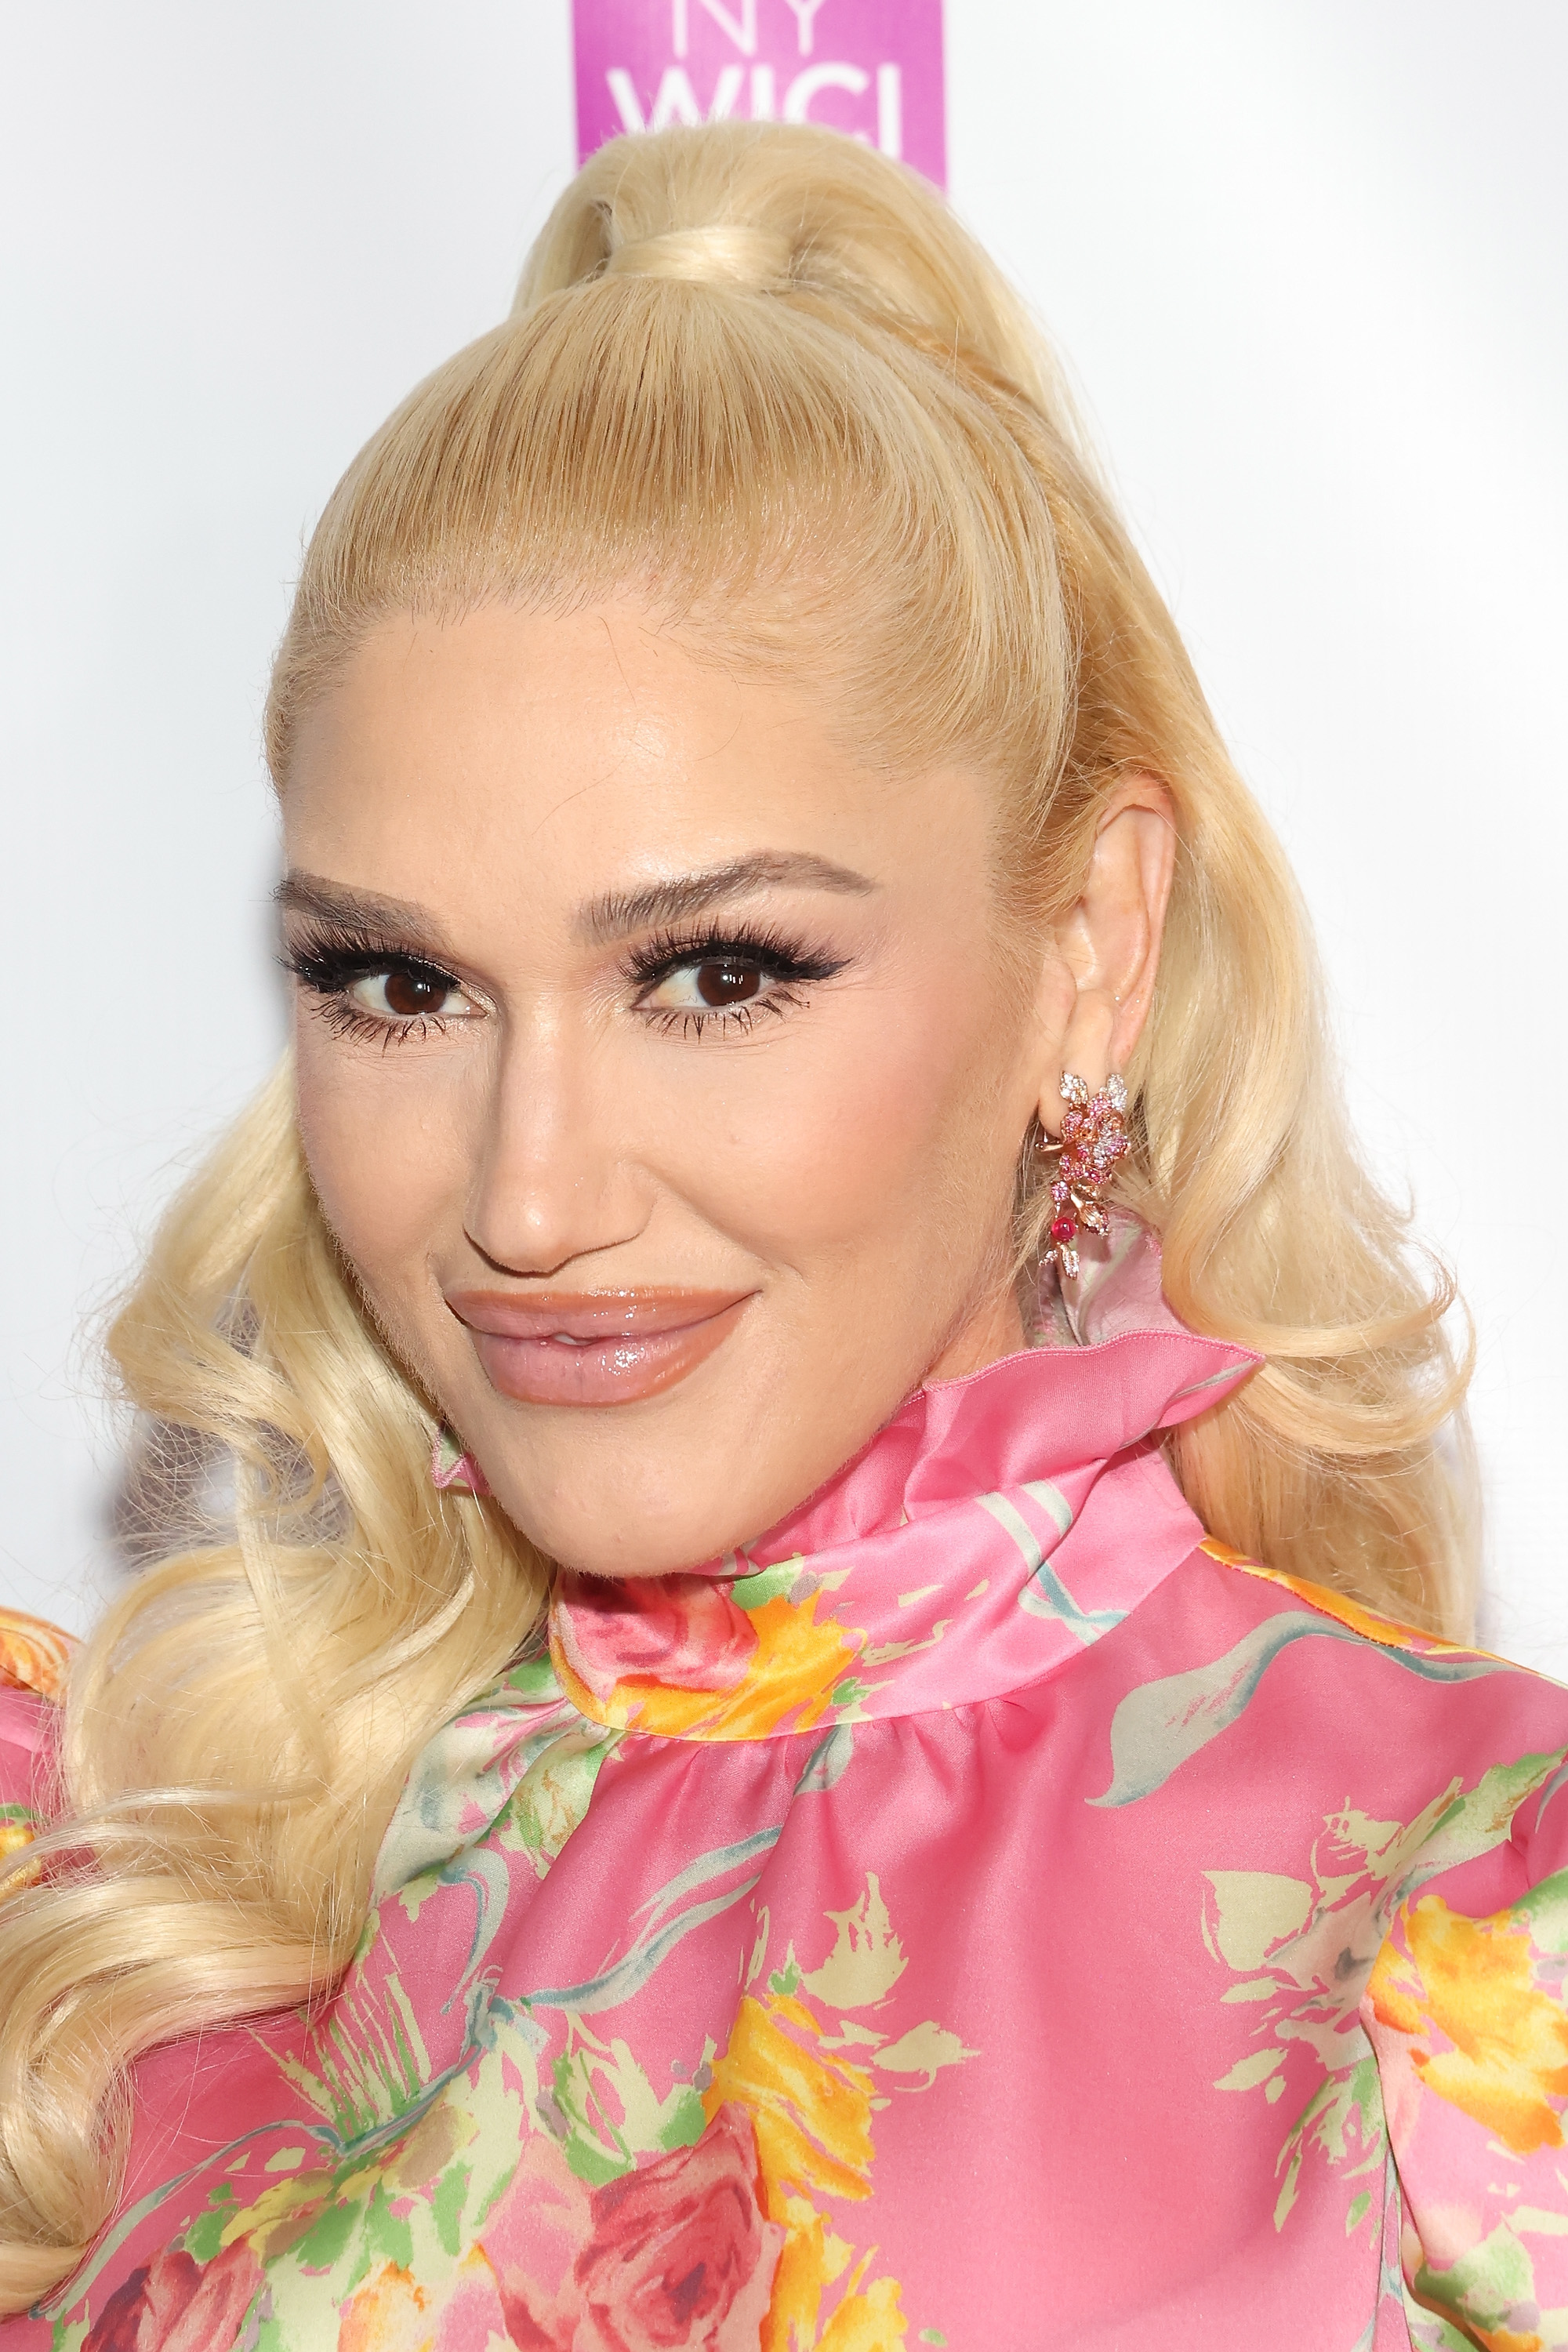 Gwen Stefani attends the Matrix Awards at The Ziegfeld Ballroom in New York City, on October 26, 2022. | Source: Getty Images